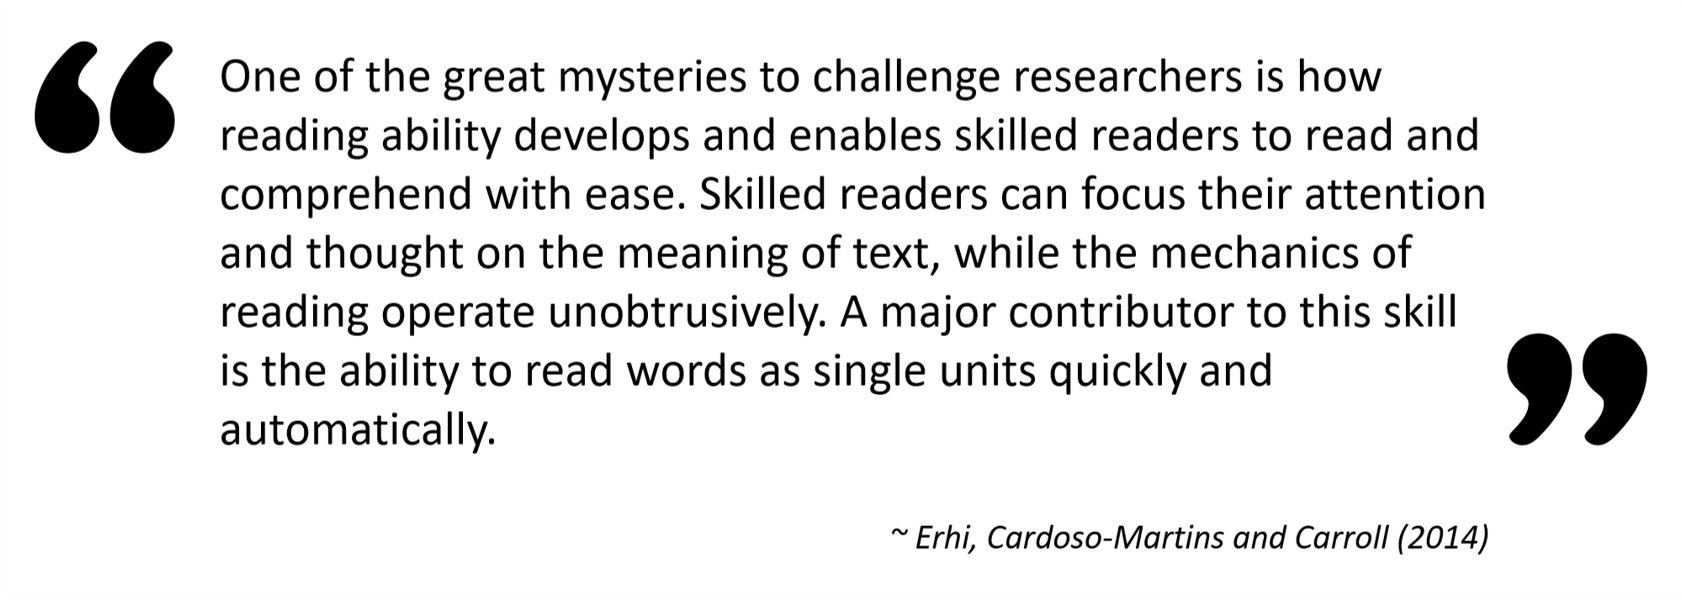  “One of the great mysteries to challenge researchers is how reading ability develops and enables skilled readers to read and comprehend with ease. Skilled readers can focus their attention and thought on the meaning of text, while the mechanics of reading operate unobtrusively. A major contributor to this skill is the ability to read words as single units quickly and automatically. — Erhi, Cardoso-Martins and Carroll (2014)